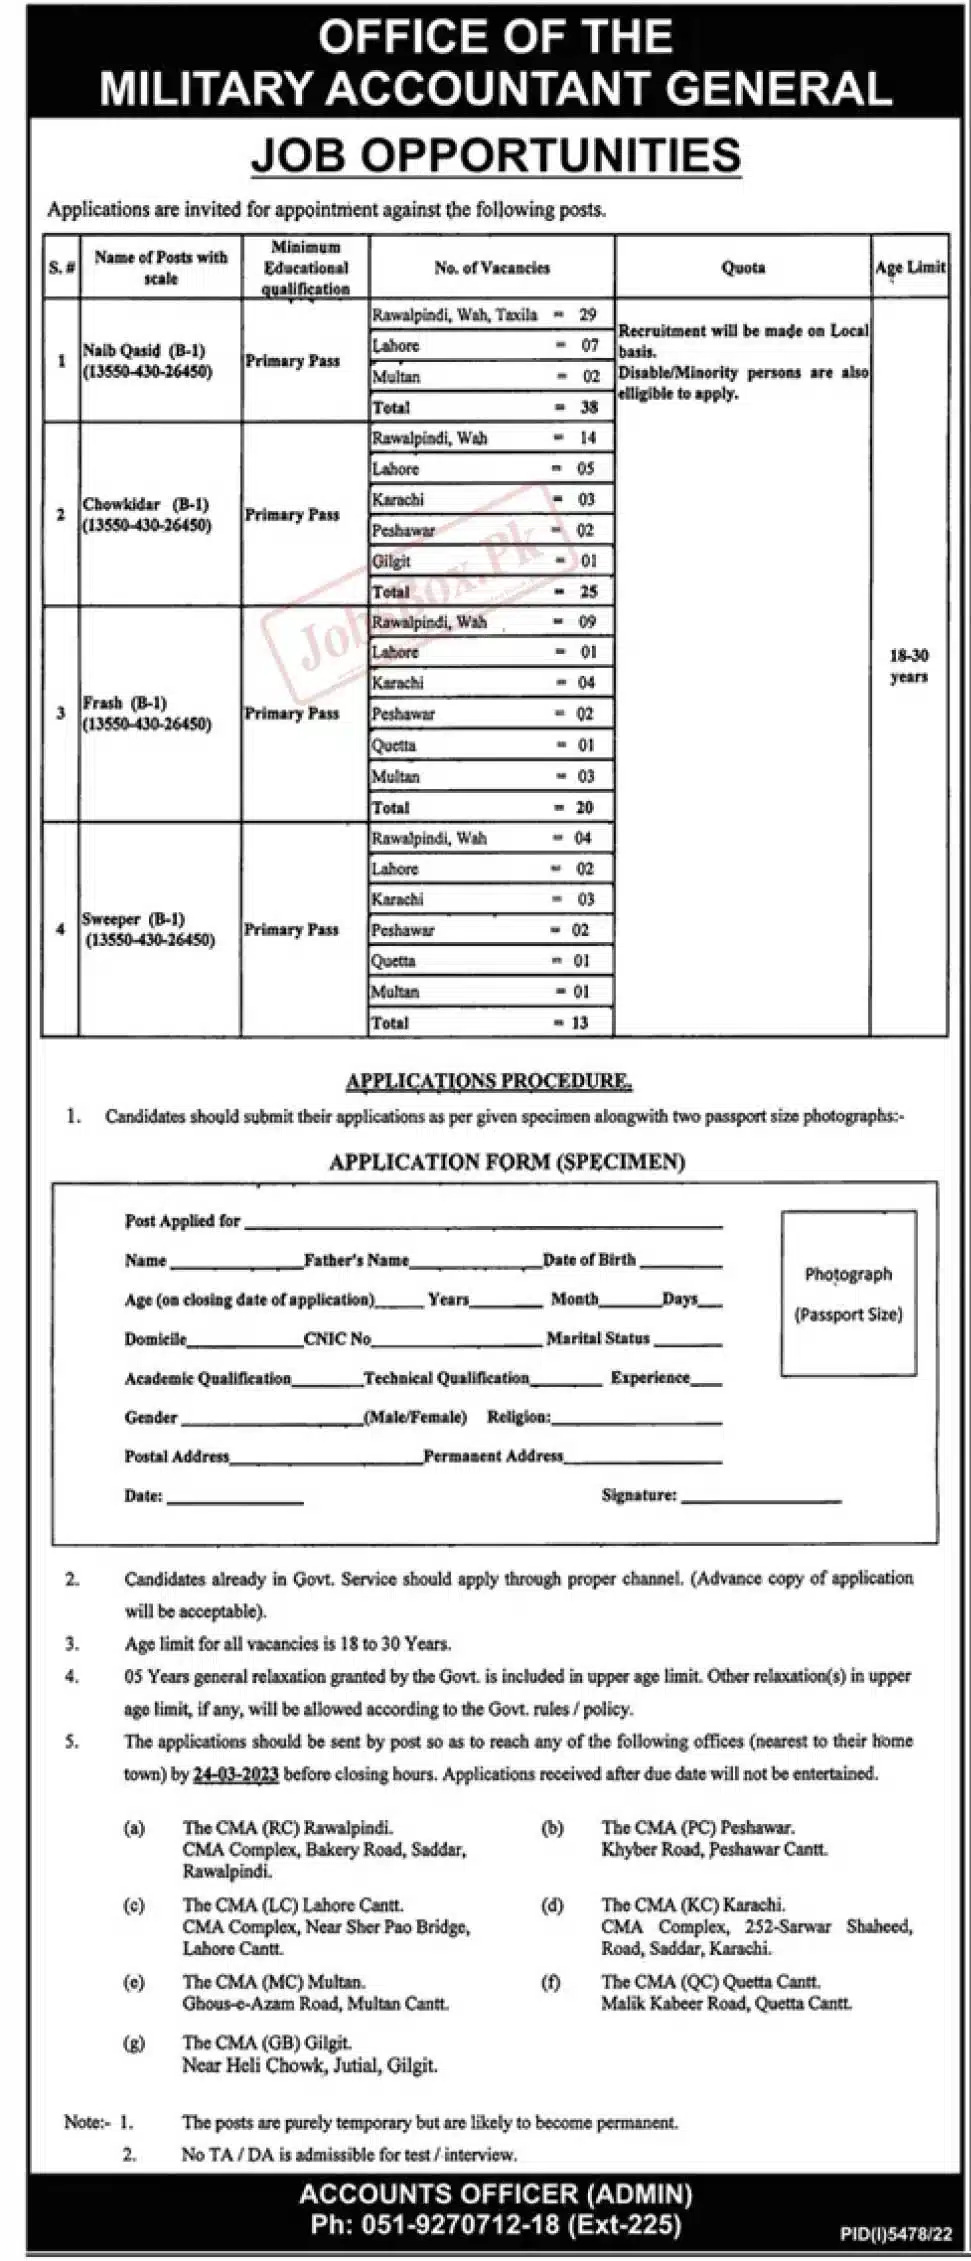 Military Accountant General Office jobs 2023 – Employment Form